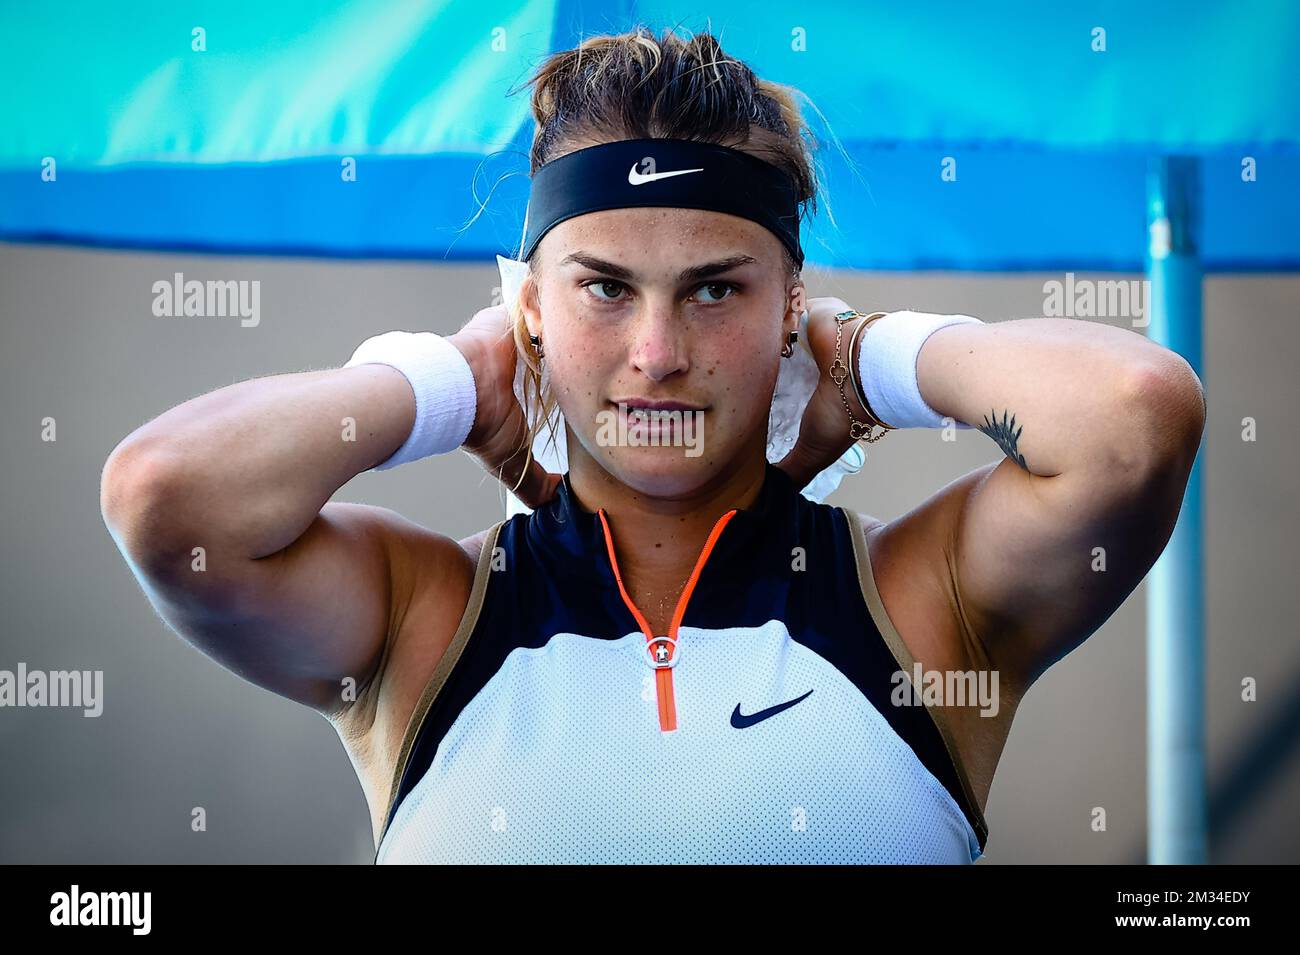 Belarussian Aryna Sabalenka pictured during a tennis match between the Belgian-Swedish pair Van Uytvank and Lister and the Belgian-Belarus pair Mertens and Sabalenka, in the first round of the women's doubles competition of the 'Australian Open' tennis Grand Slam, Wednesday 10 February 2021 in Melbourne Park, Melbourne, Australia. Mertens-Sabalenka won in three sets. The 2021 edition of the Australian Grand Slam has been delayed by three week because of the ongoing pandemic. BELGA PHOTO PATRICK HAMILTON Stock Photo